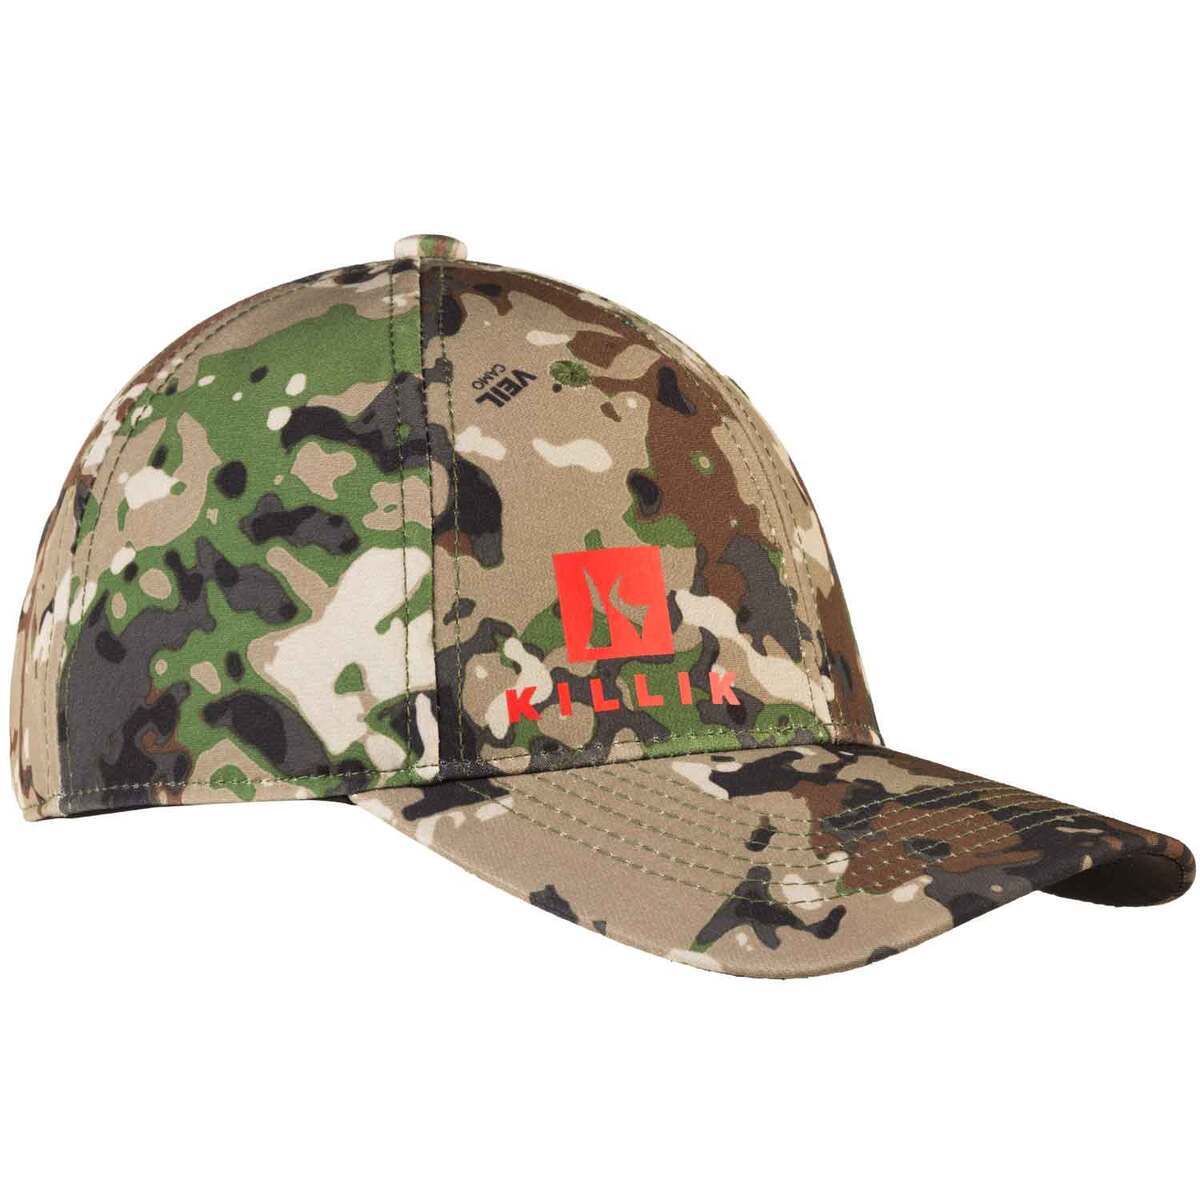 Under Armour Fishing Camo Cap - Adjustable Back (For Men)